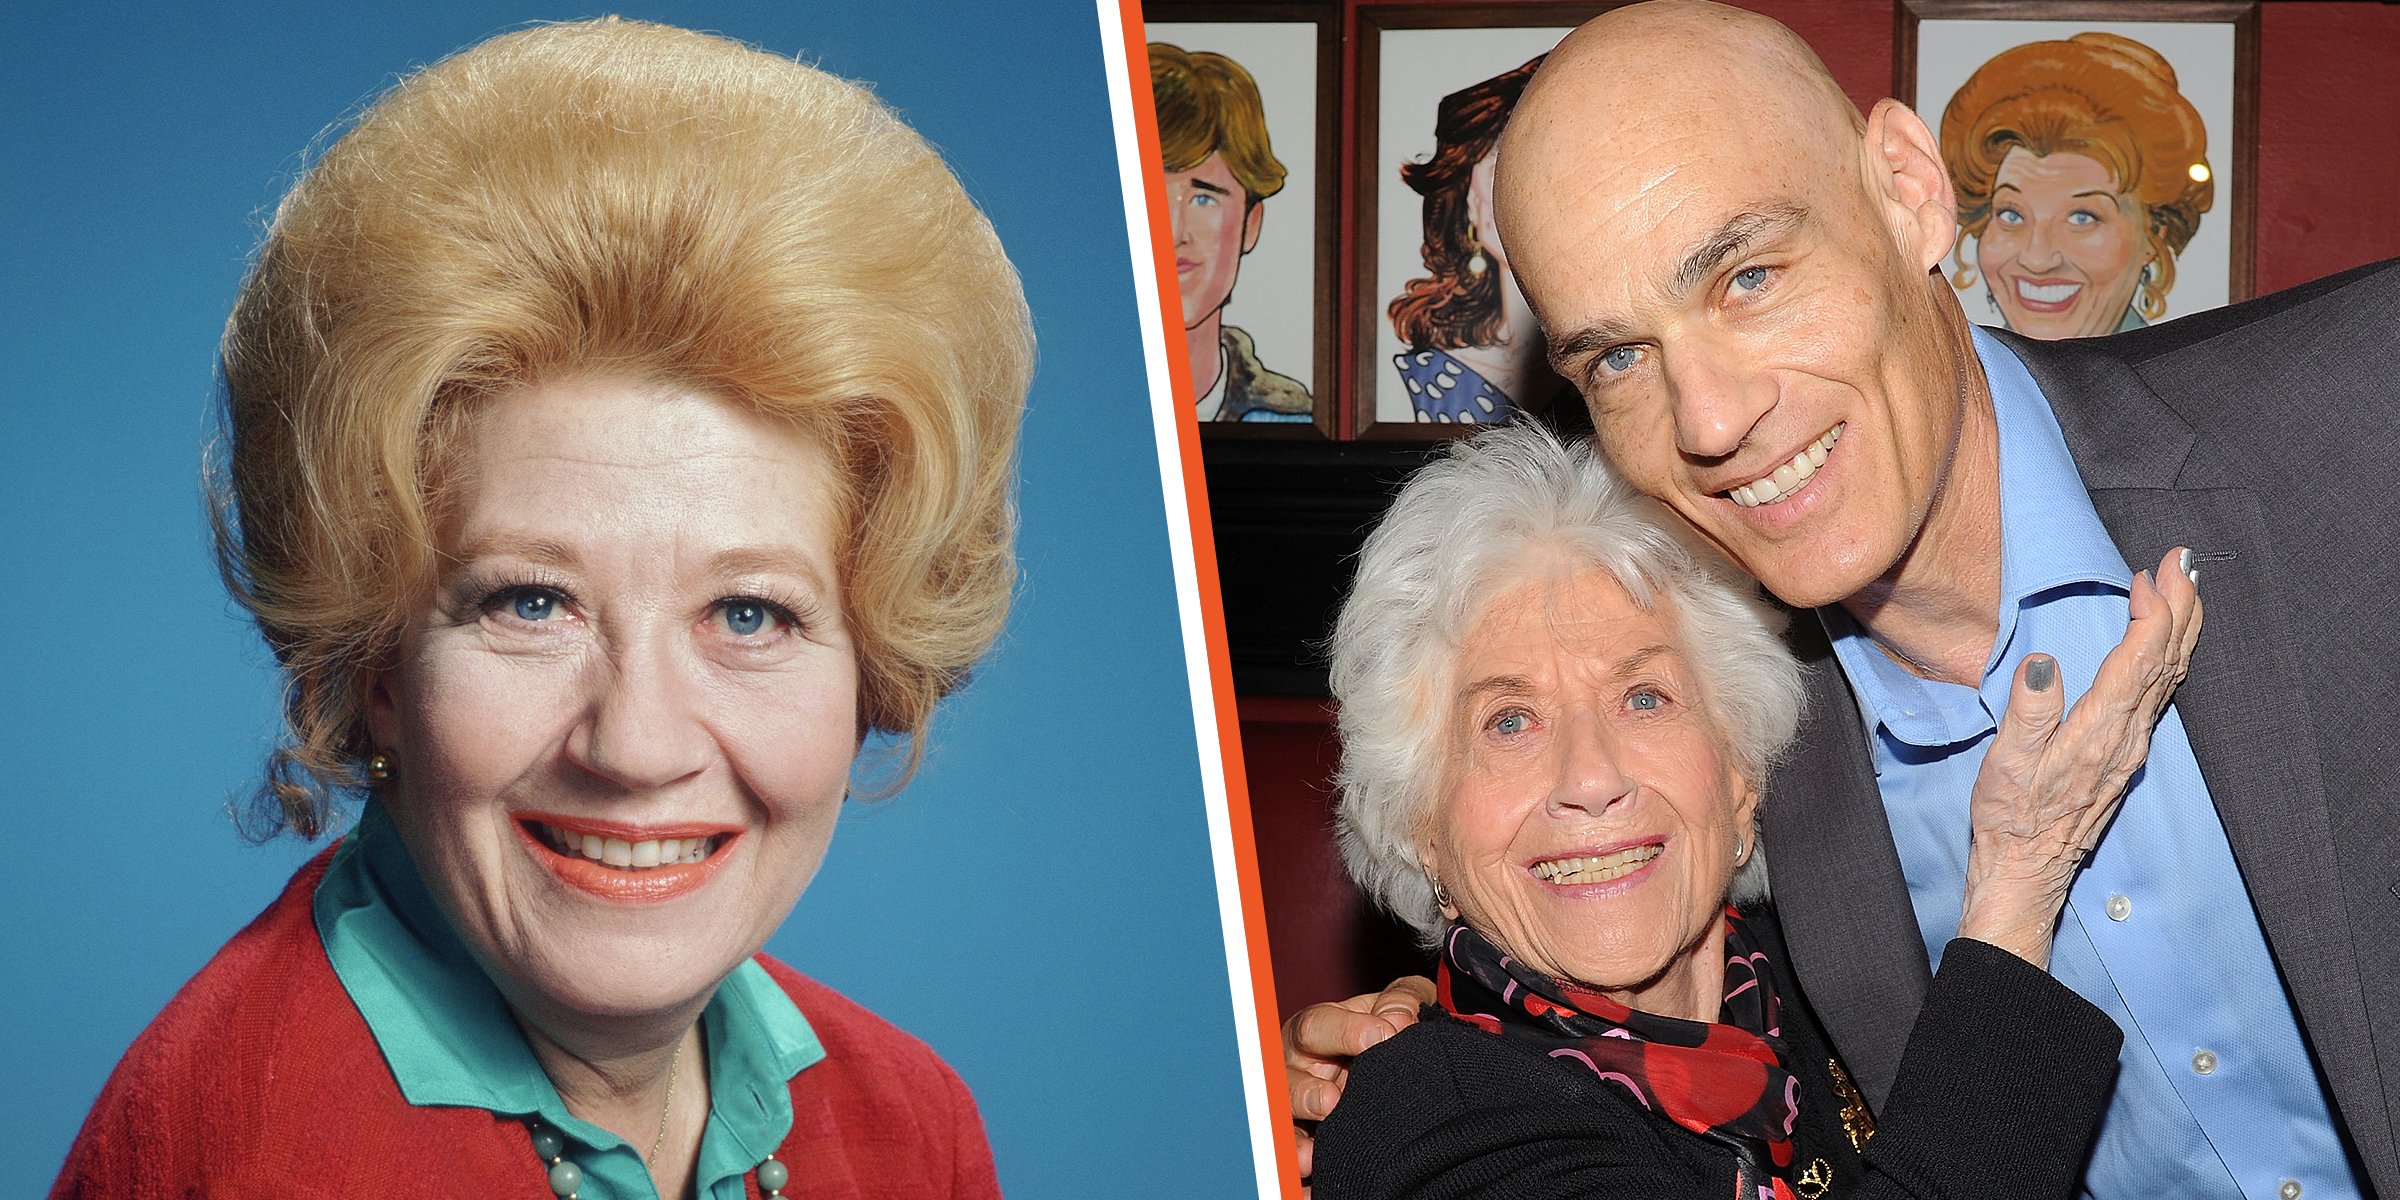 Meet Charlotte Rae’s 2 Kids with Husband of 25 Years Who Fell in Love with ‘Man of His Dreams'